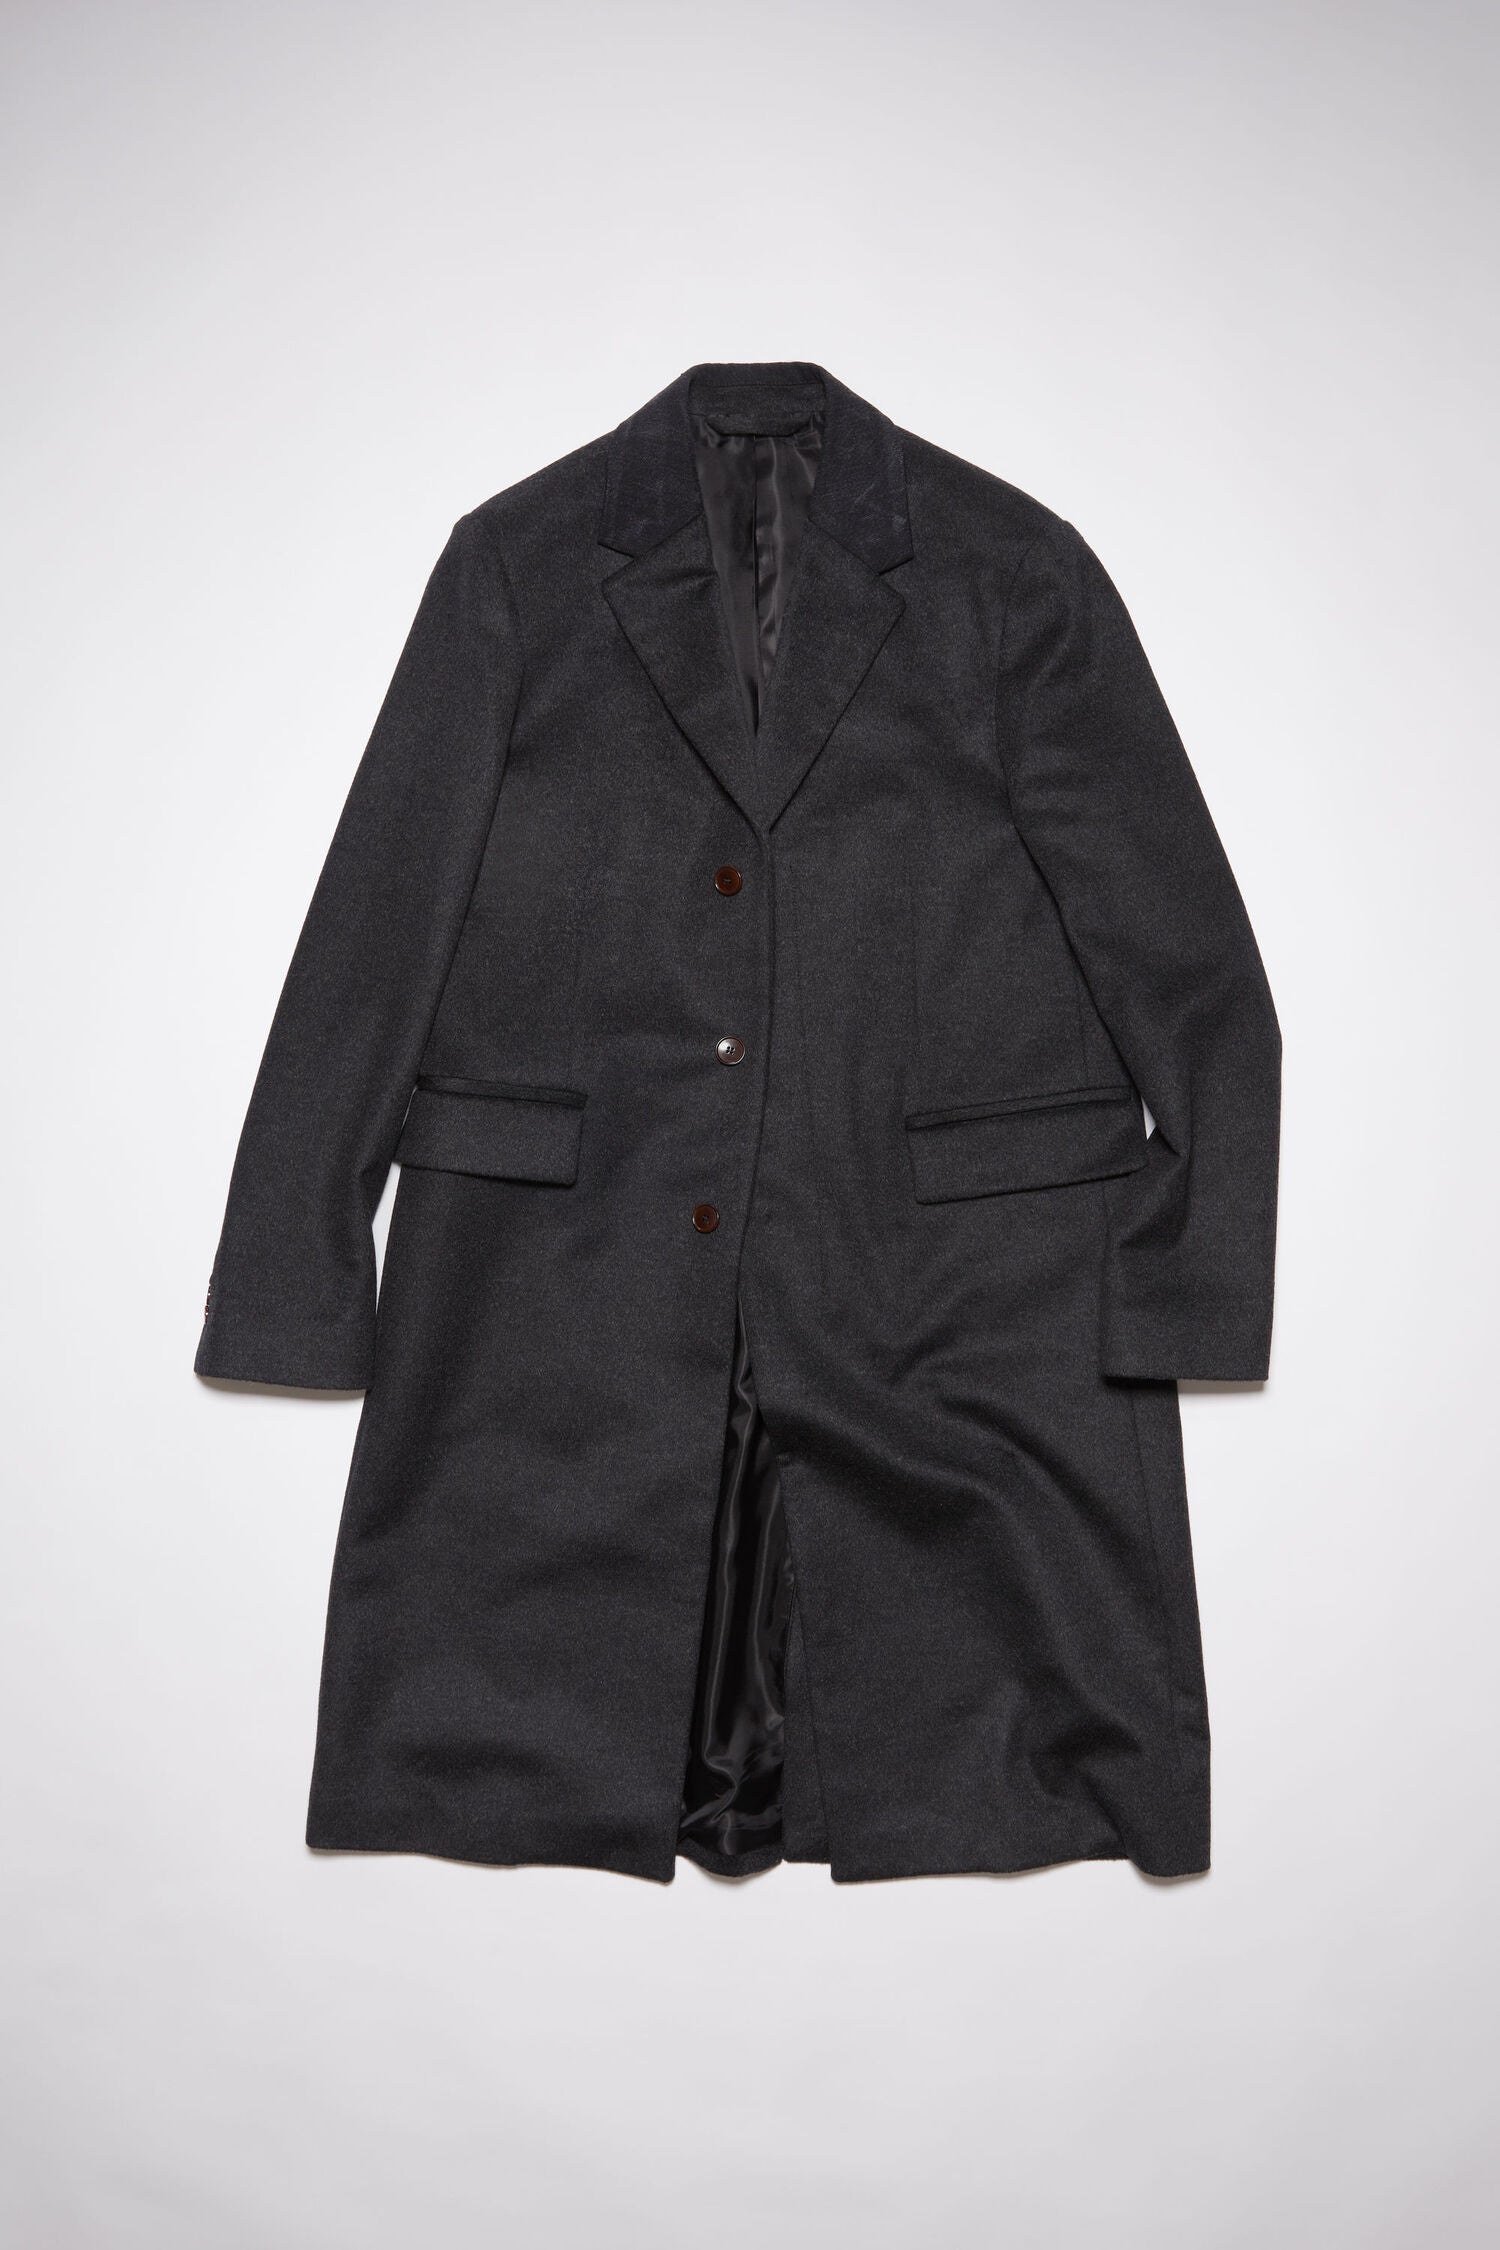 ACNE STUDIOS - CHARCOAL GREY SINGLE-BREASTED WOOL COAT - LE LABO STORE